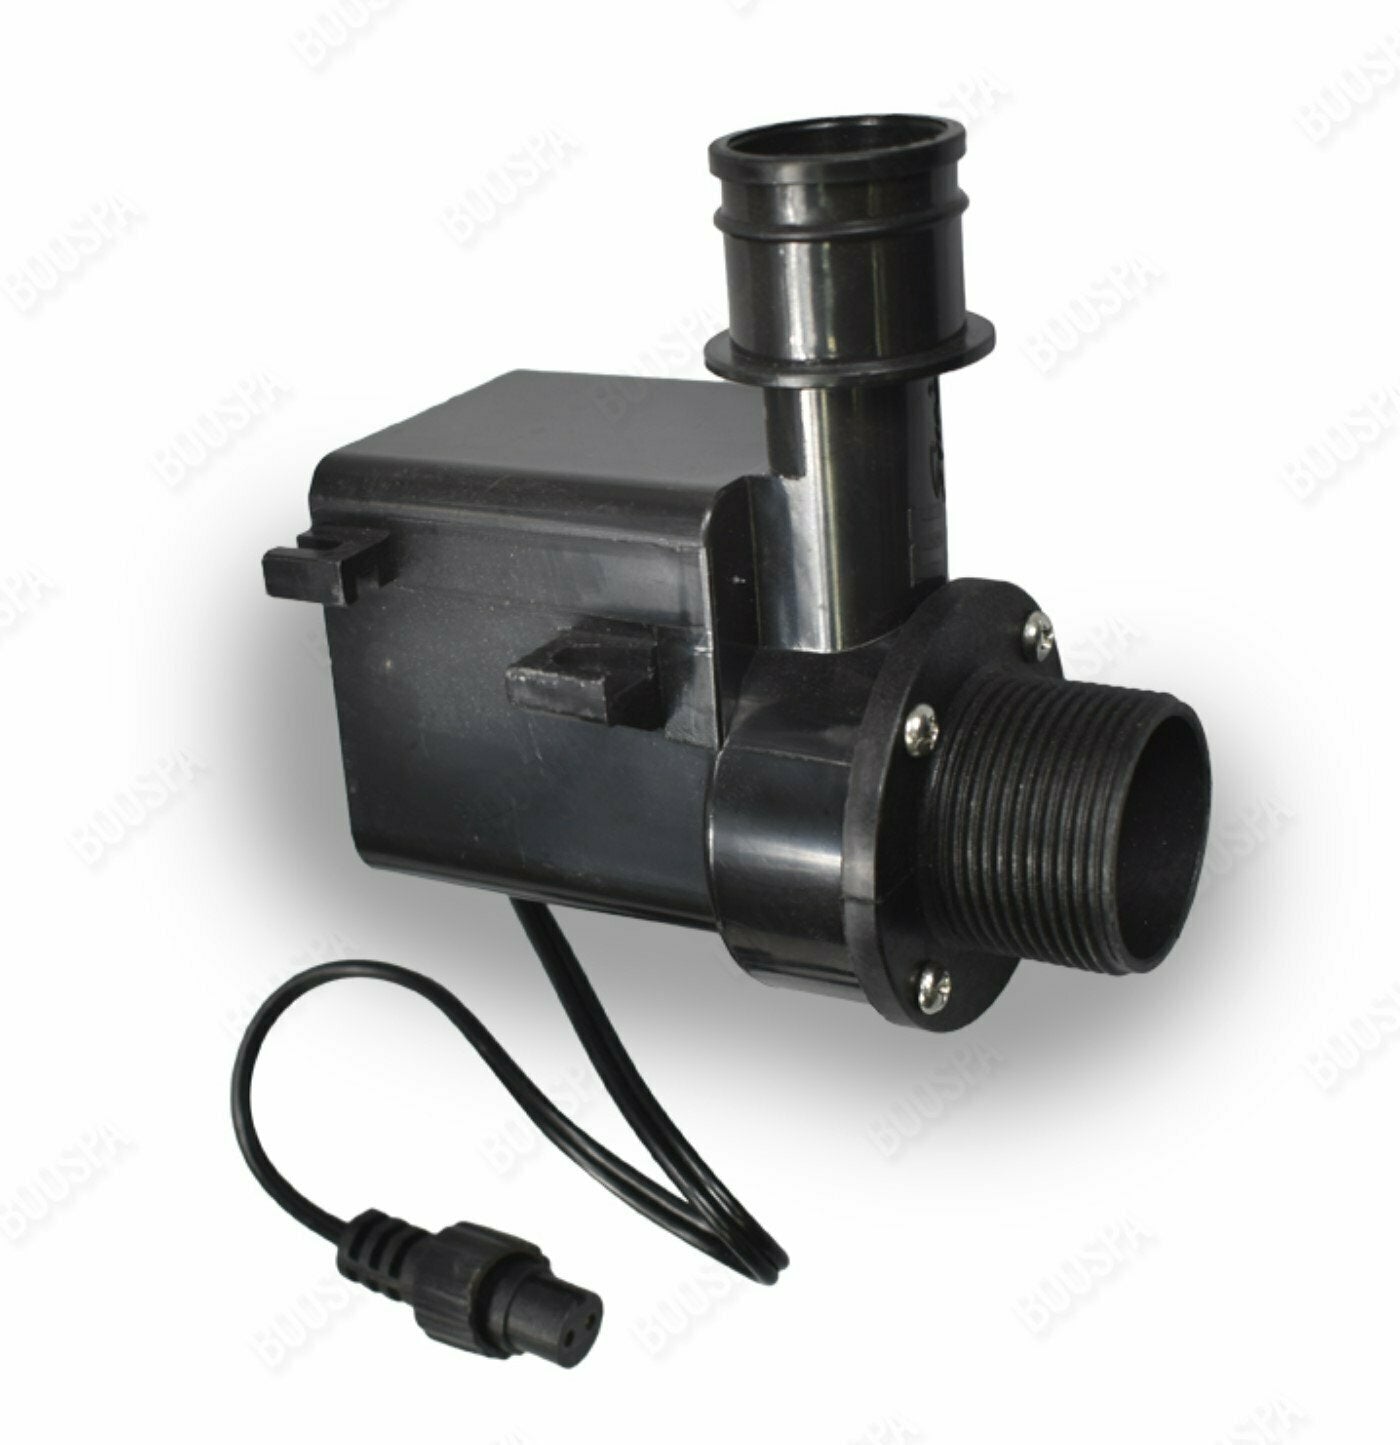 MSPA Filter Pump with silicone gasket (2019-21) [B9301327]